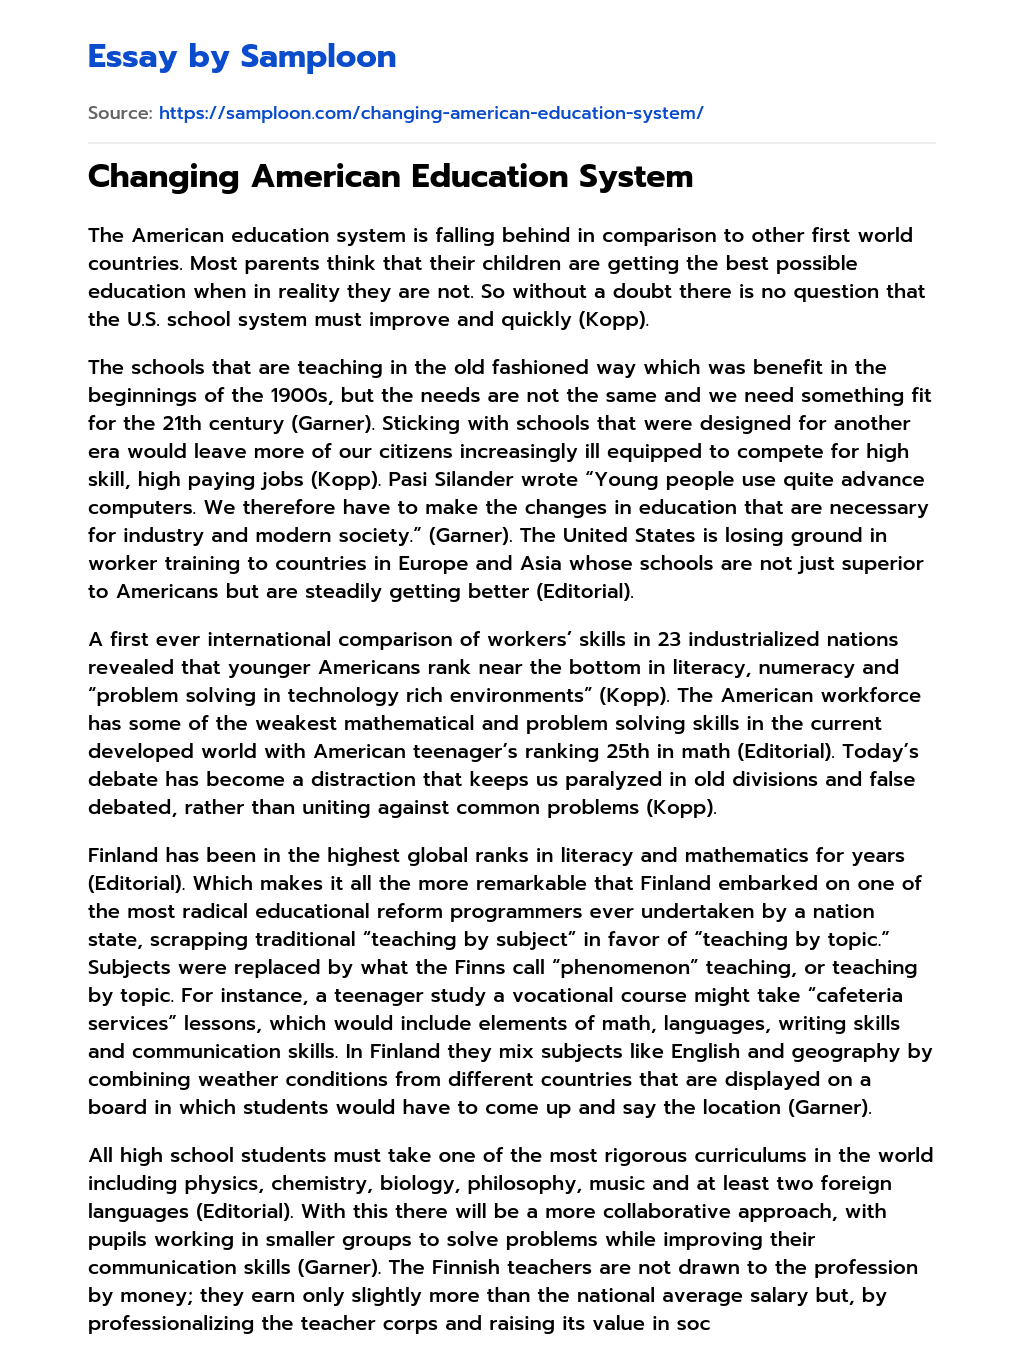 changing-american-education-system-free-essay-sample-on-samploon